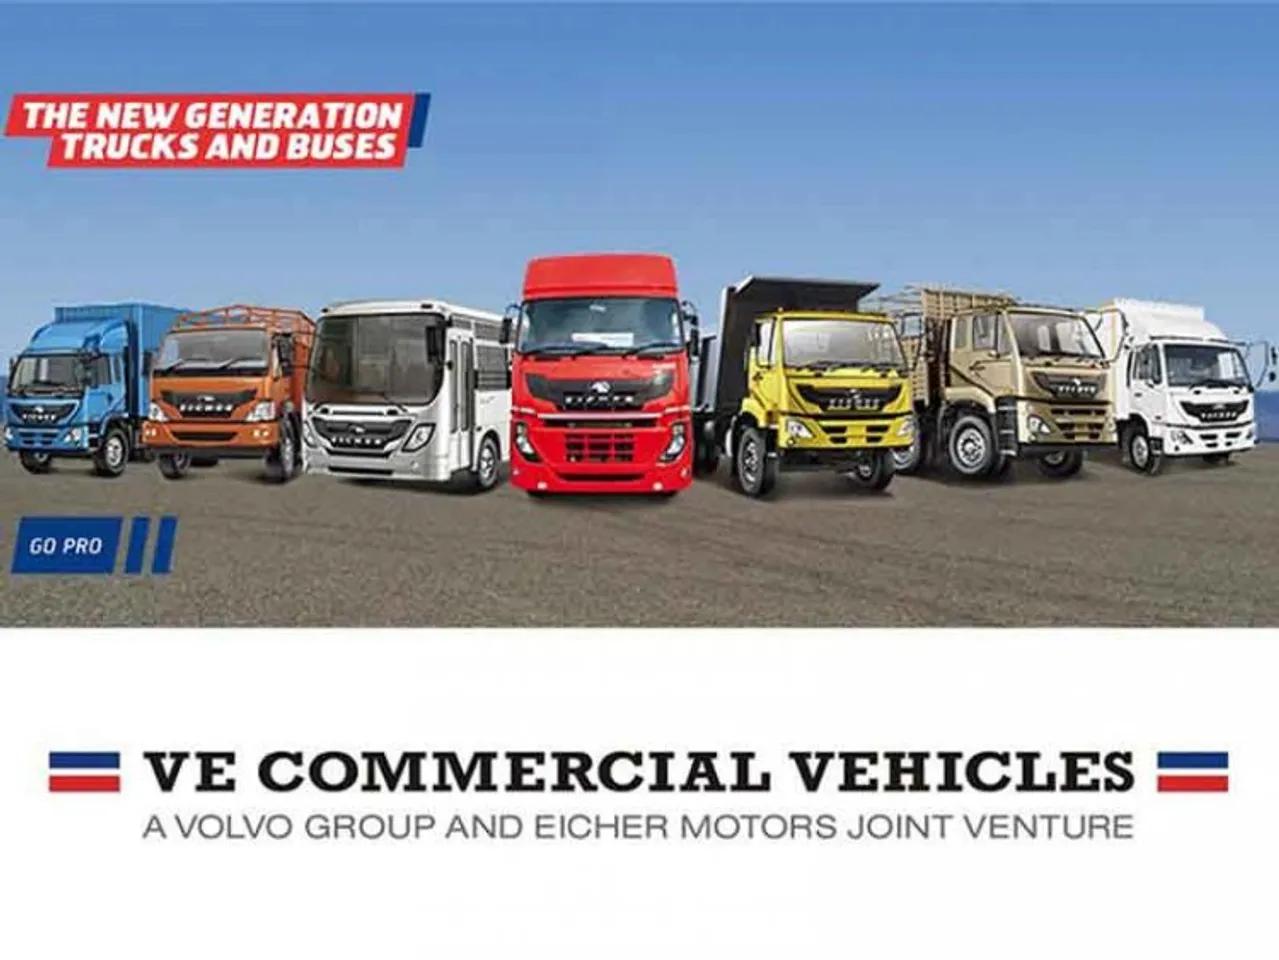 VE Commercial Vehicle, a joint venture between Volvo Group and Echer Motors